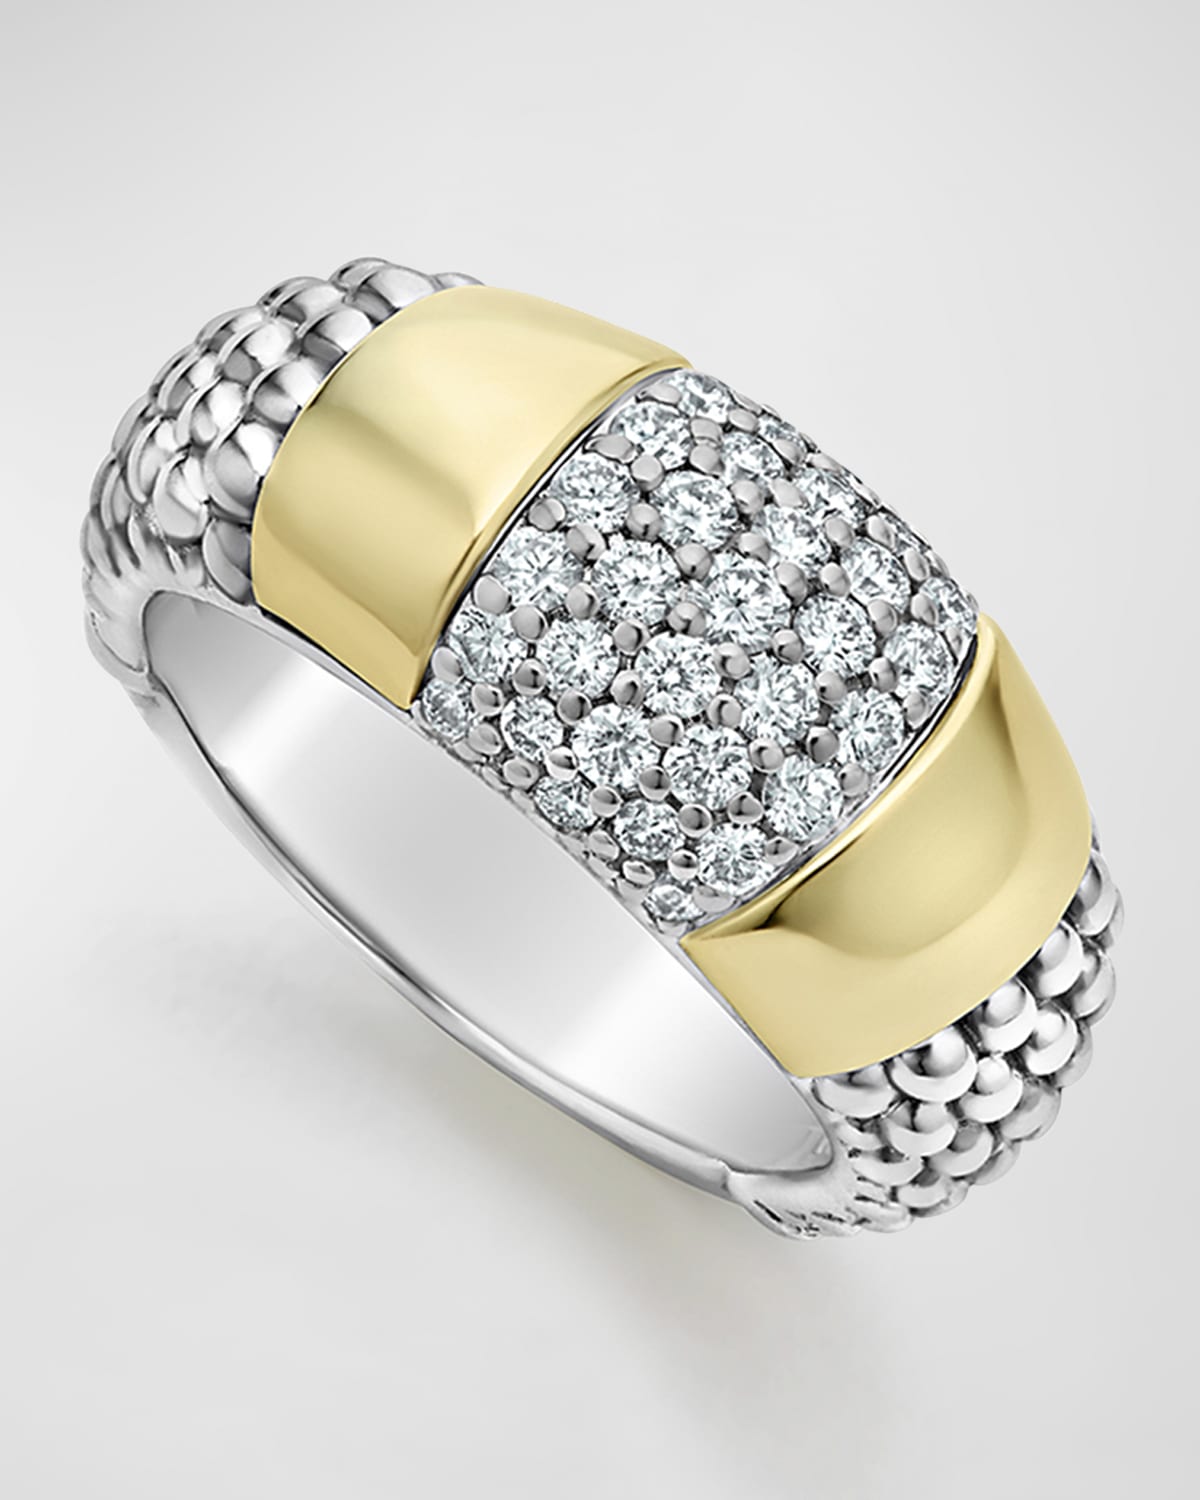 LAGOS DIAMOND AND SMOOTH STATION RING IN 18K GOLD WITH STERLING SILVER CAVIAR BEADING